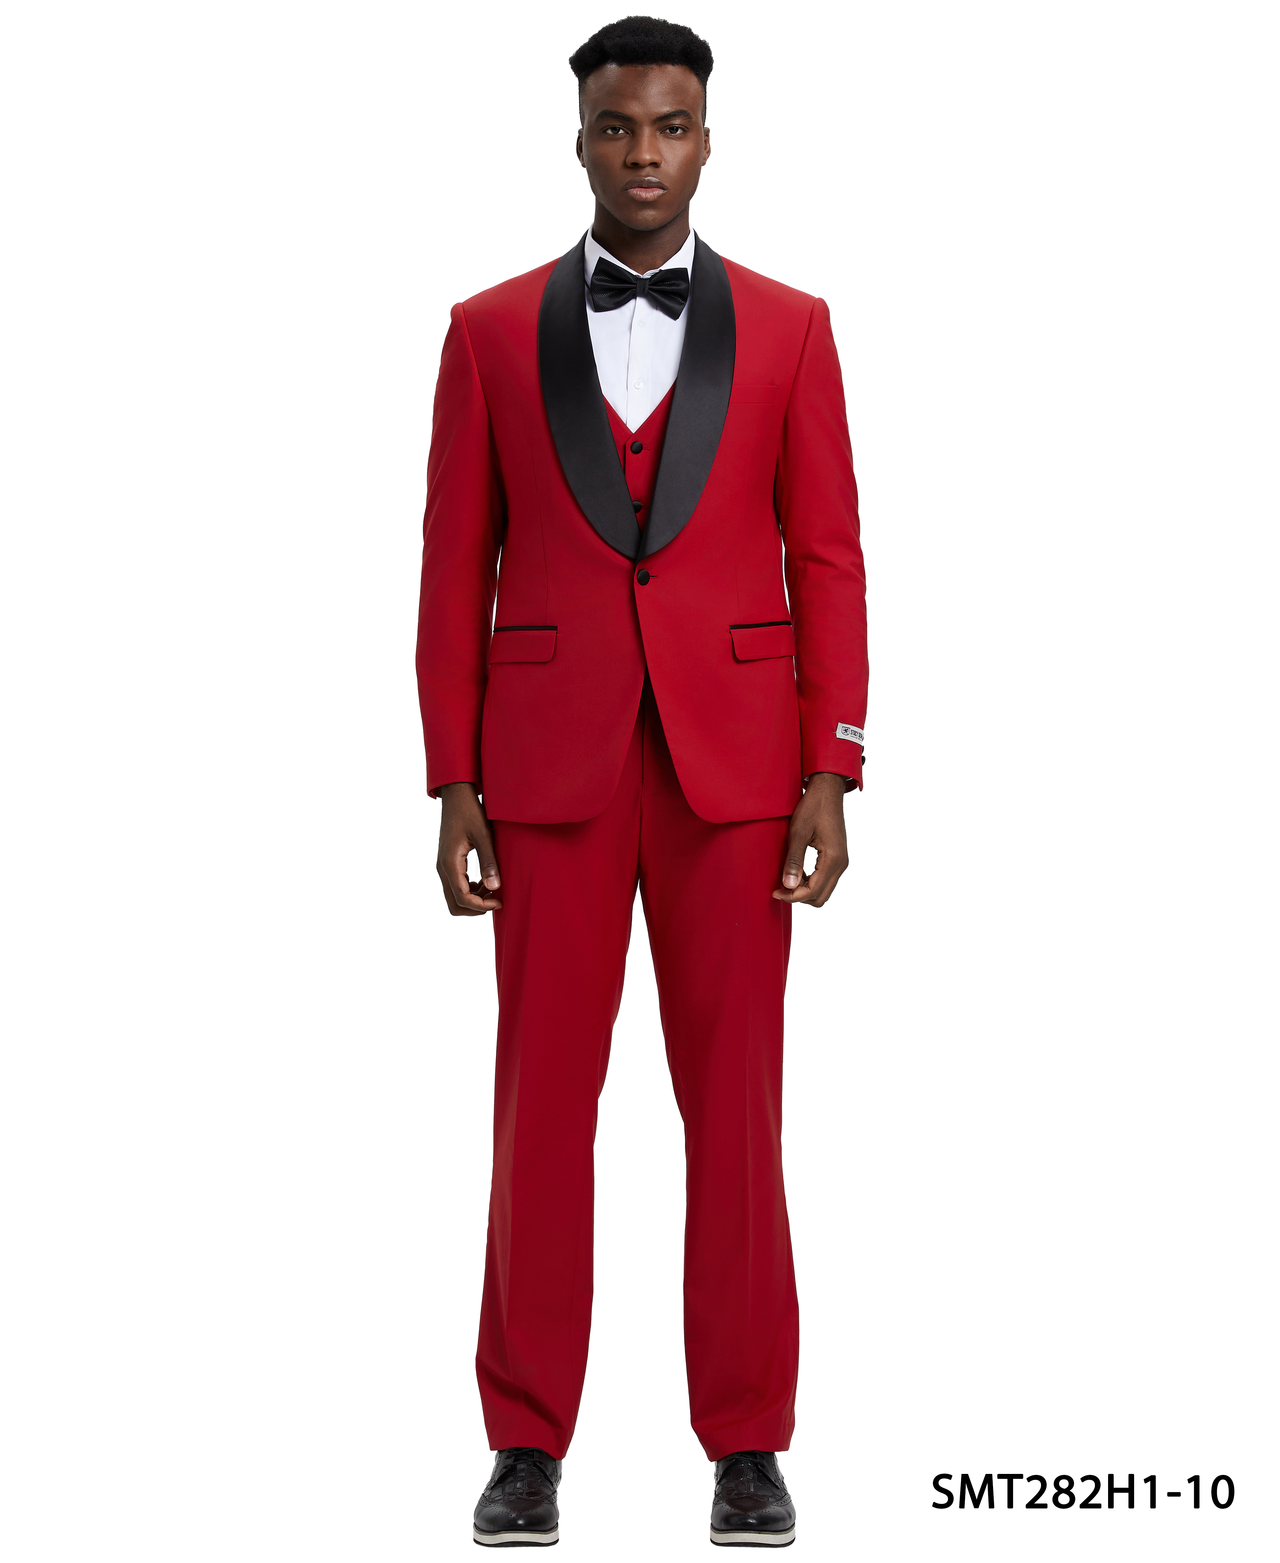 Stacy Adams 3 PC Red Solid Tuxedo Mens Suit - Hattitude